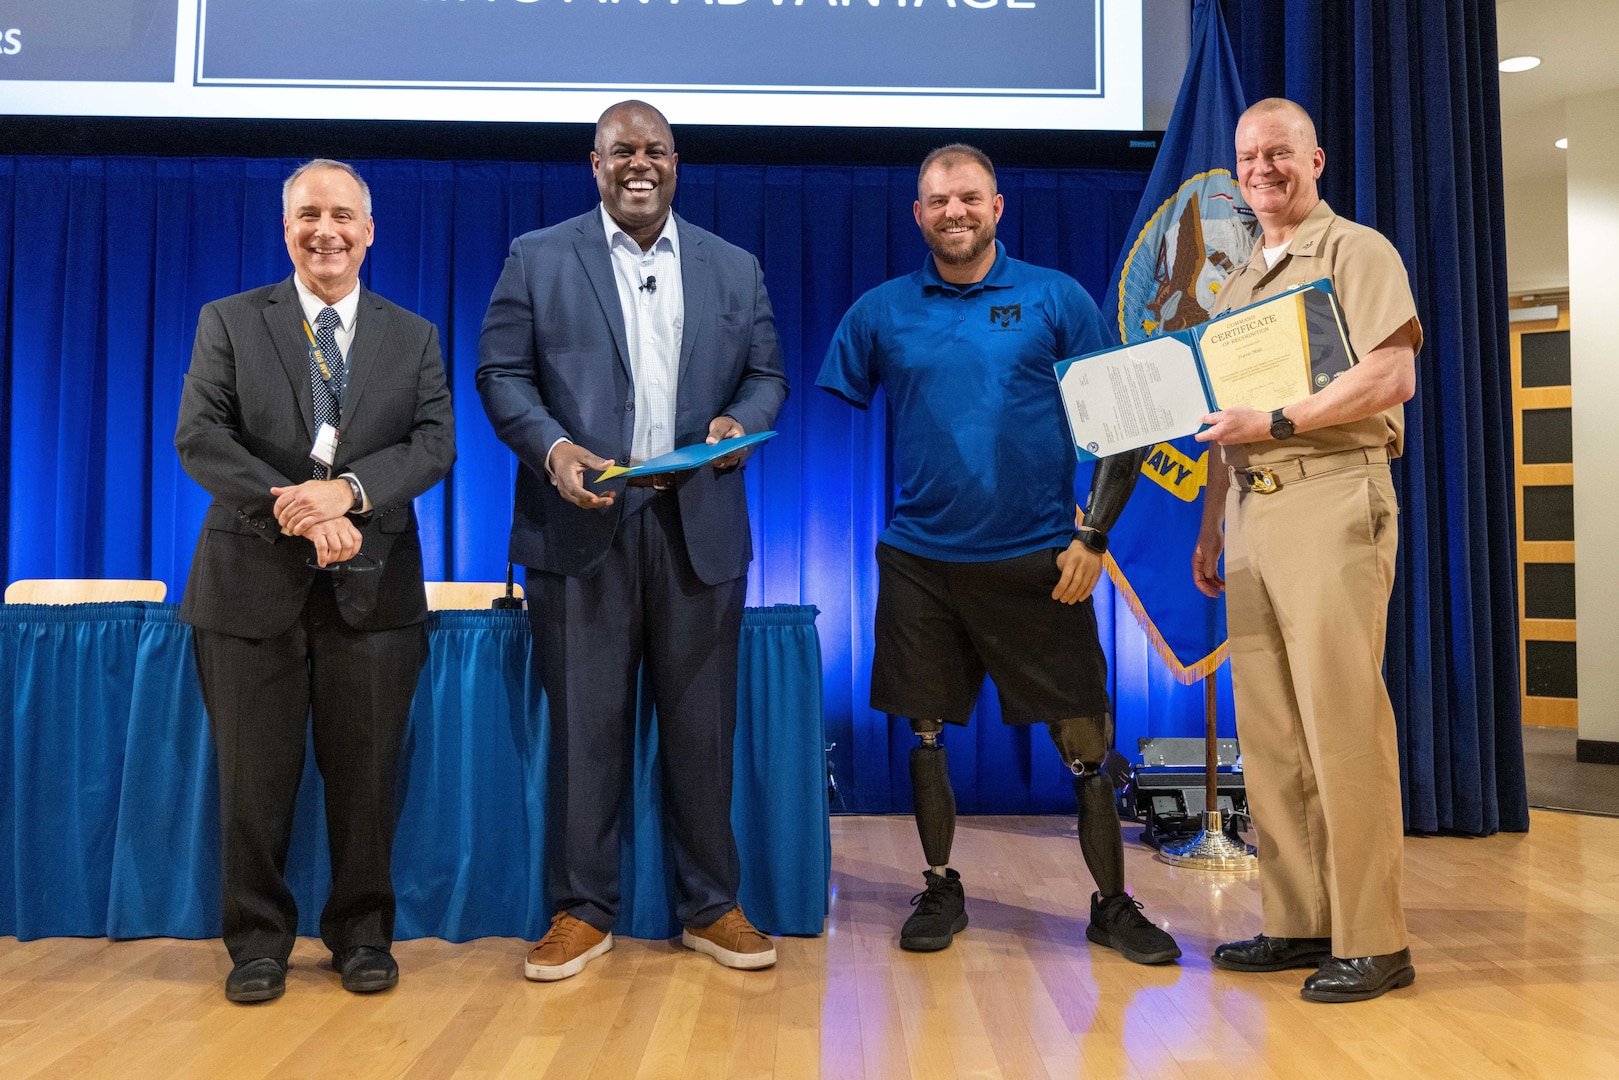 Naval Surface Warfare Center, Carderock Division's Technical Director Larry Tarasek (far left) and Commanding Officer Capt. Todd E. Hutchison (far right) present certificates of recognition to Reggie Rivers (middle left) and Travis Mills (middle right), thanking them for being guest speakers during Carderock's 21st Century Workforce: A Leadership in a Diverse Environment Event (LDEE) in West Bethesda, Md., on March 1. (U.S. Navy photo by Devin Pisner)